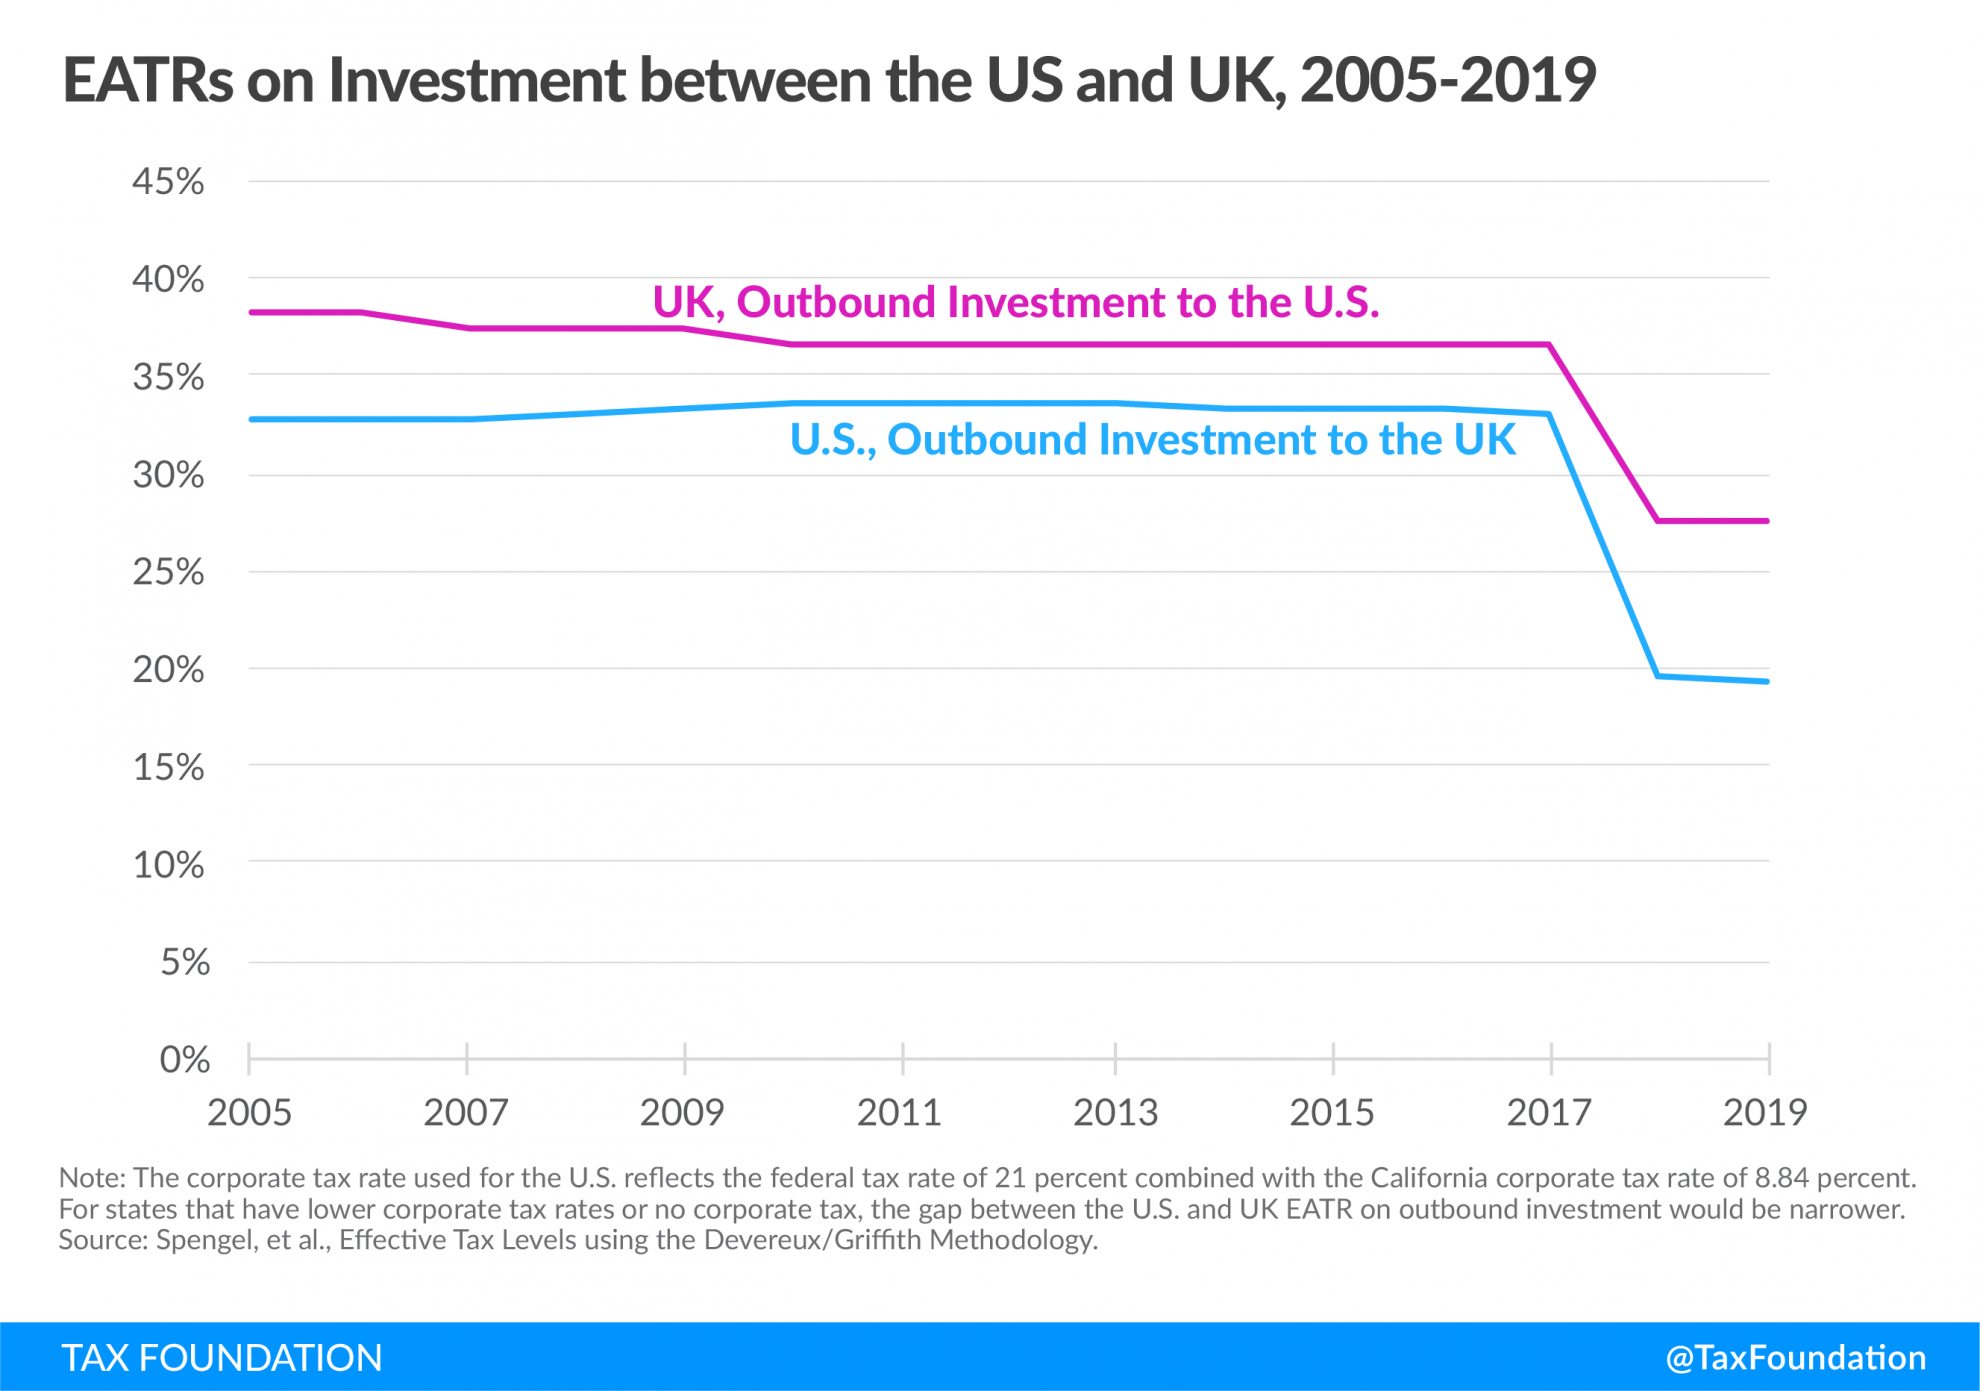 Effective average tax rates in the US and UK, US Average Tax Rates on Investment, UK Effective Average Tax Rates on Investment, UK Average Tax Rates on Investment